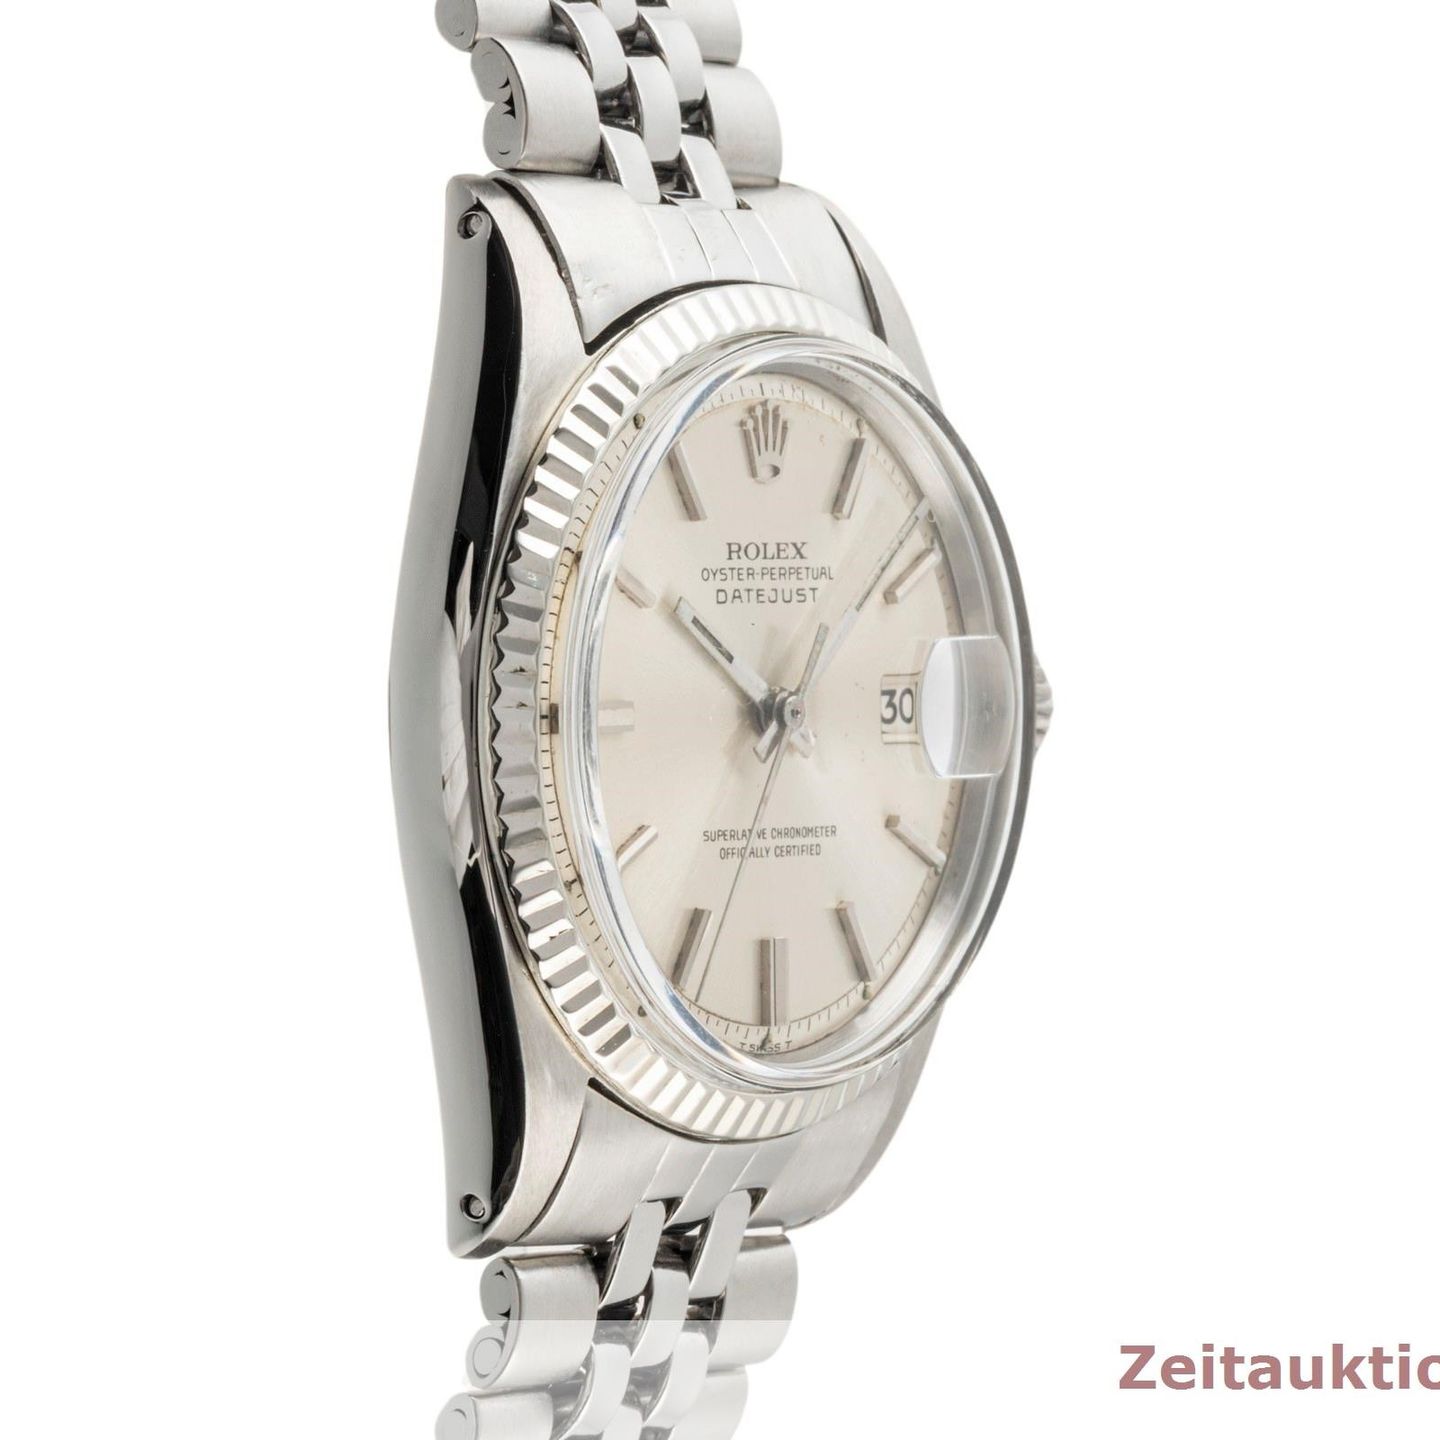 Rolex Datejust 1601 (1971) - Silver dial 36 mm White Gold case (8/8)